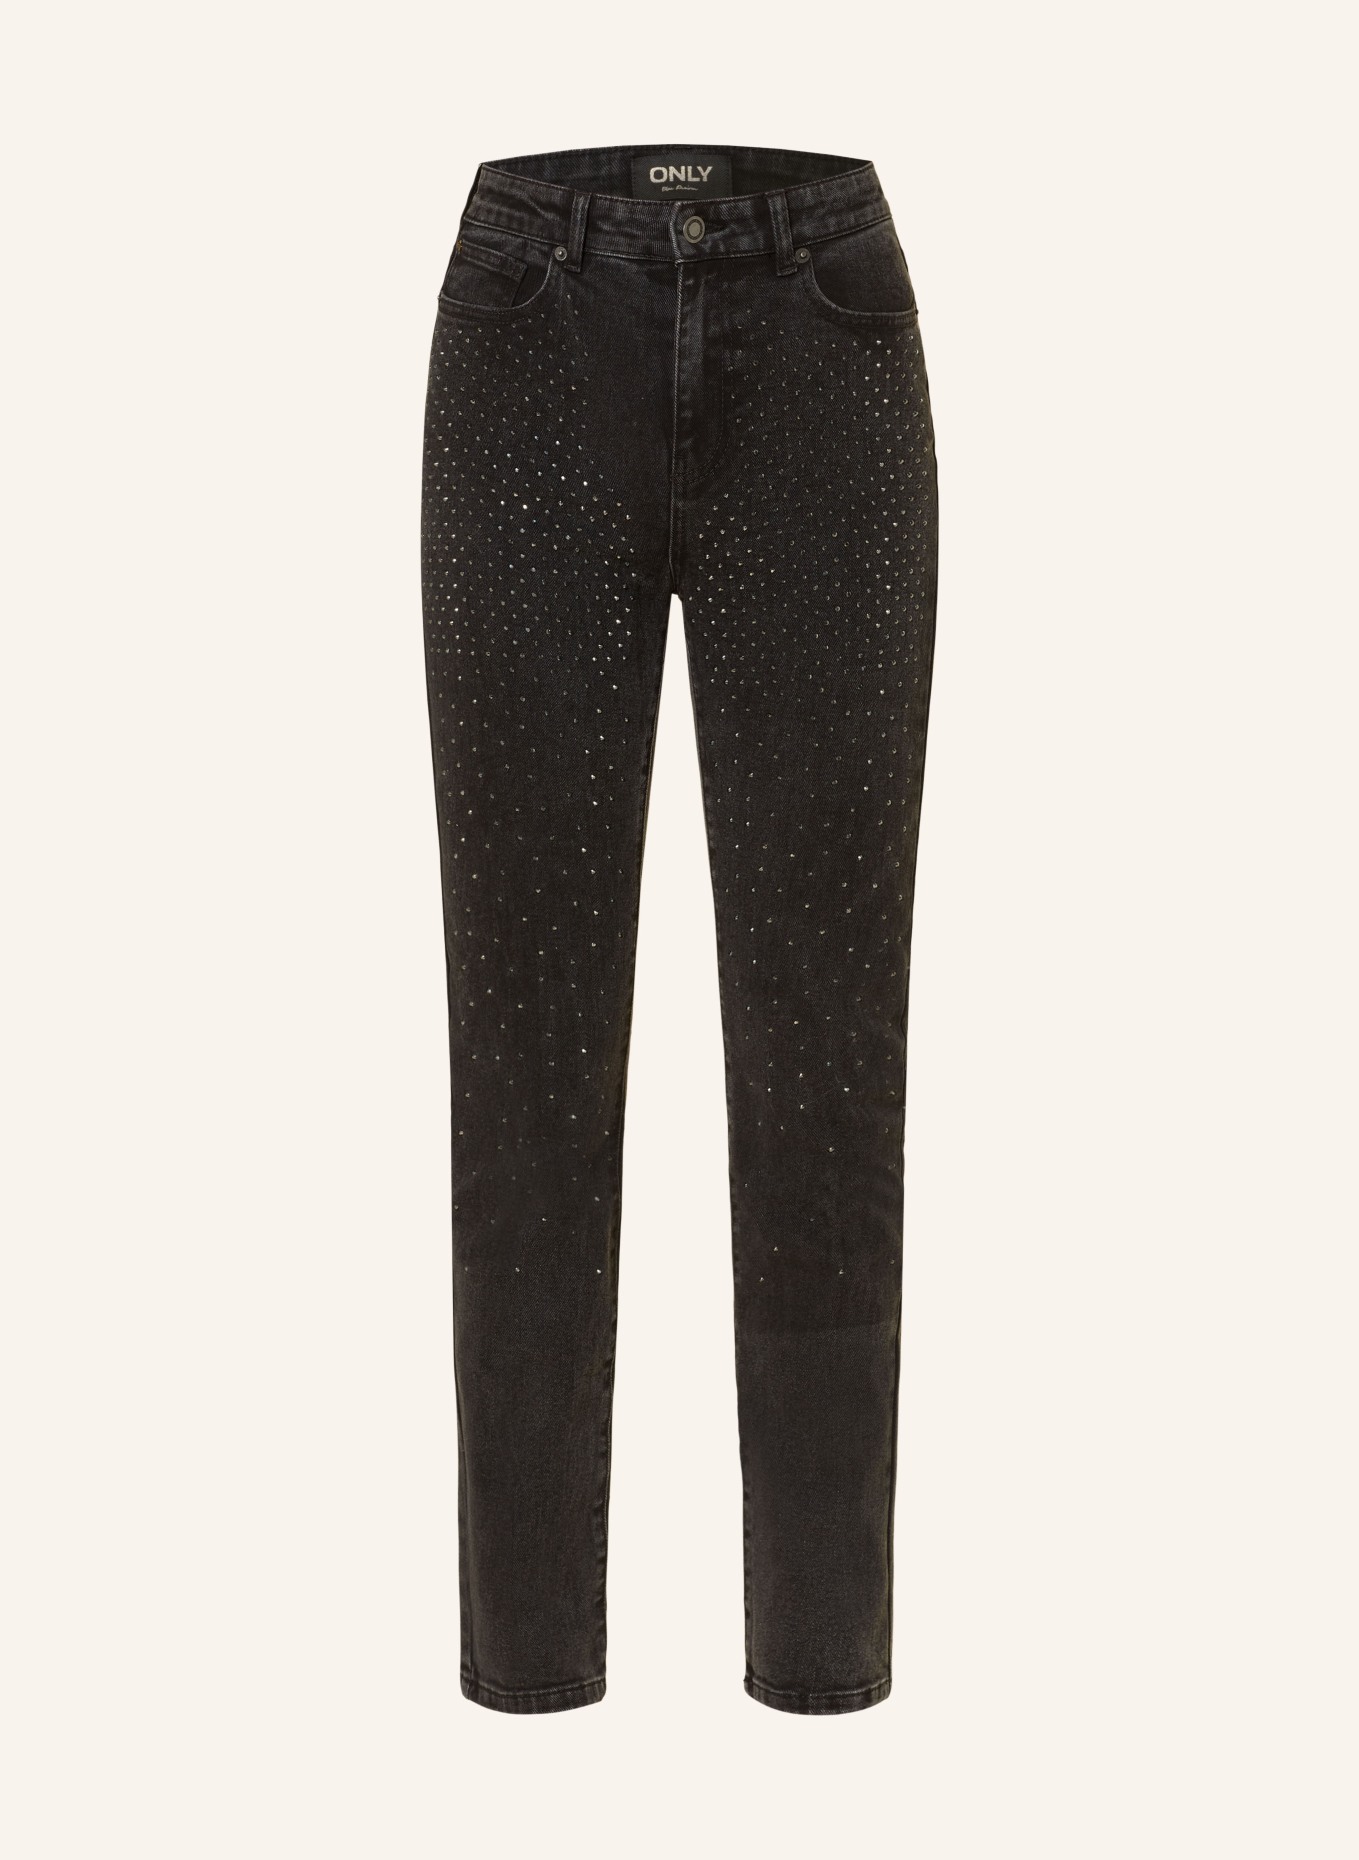 ONLY Jeans EMILY with decorative gems, Color: WASHED BLACK (Image 1)